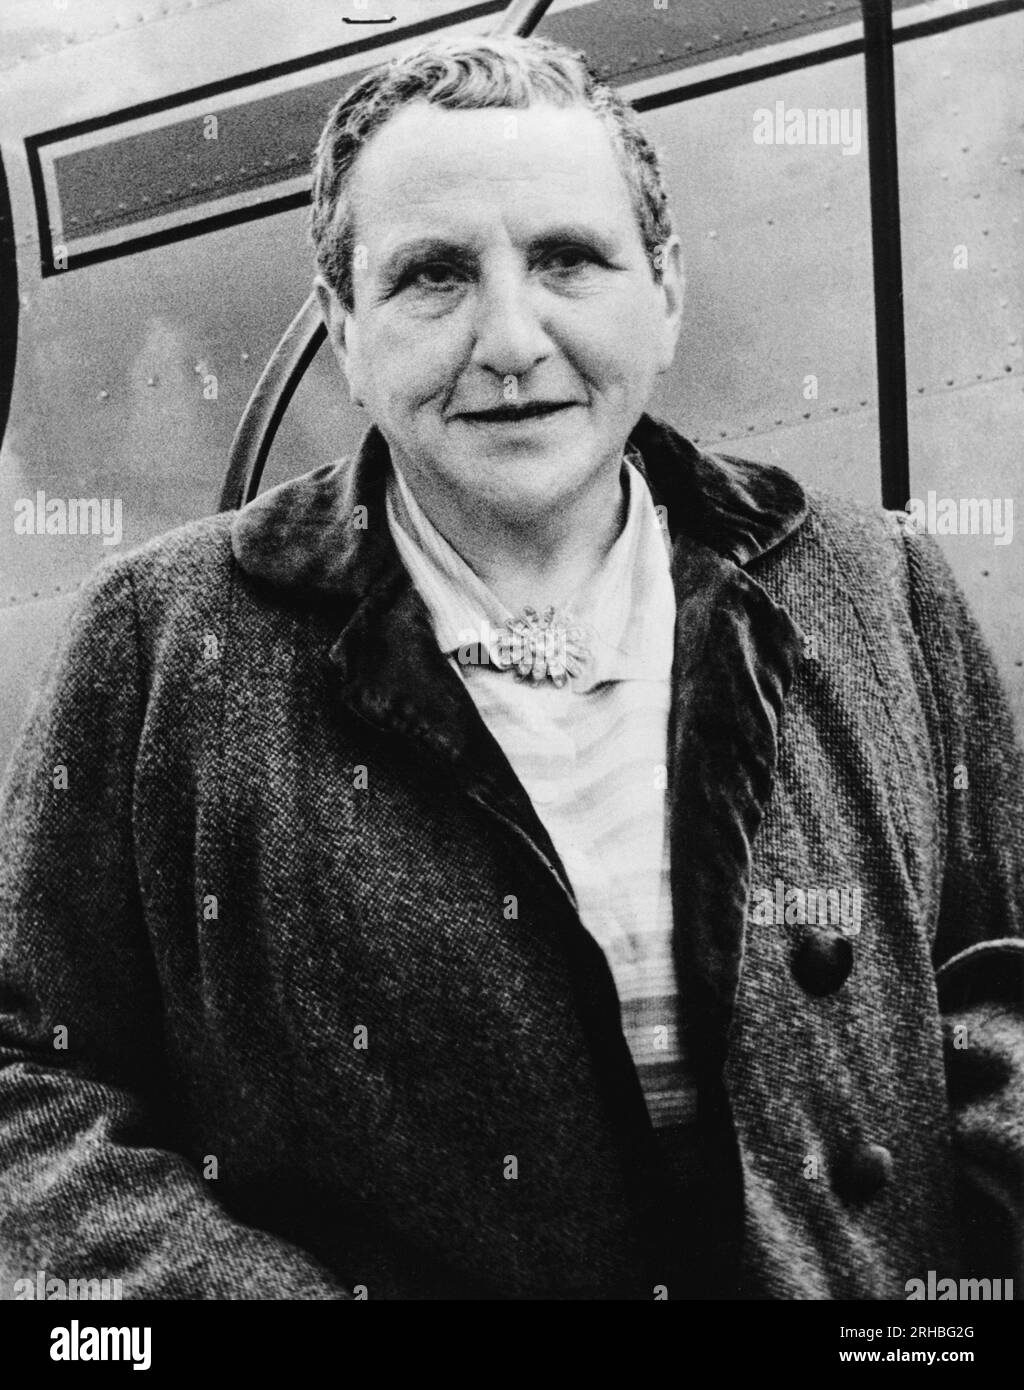 Los Angeles, California:  March 31, 1945 Art collector and author Gertrude Stein as she arrived in LA on her lecture tour of the United States. Stock Photo